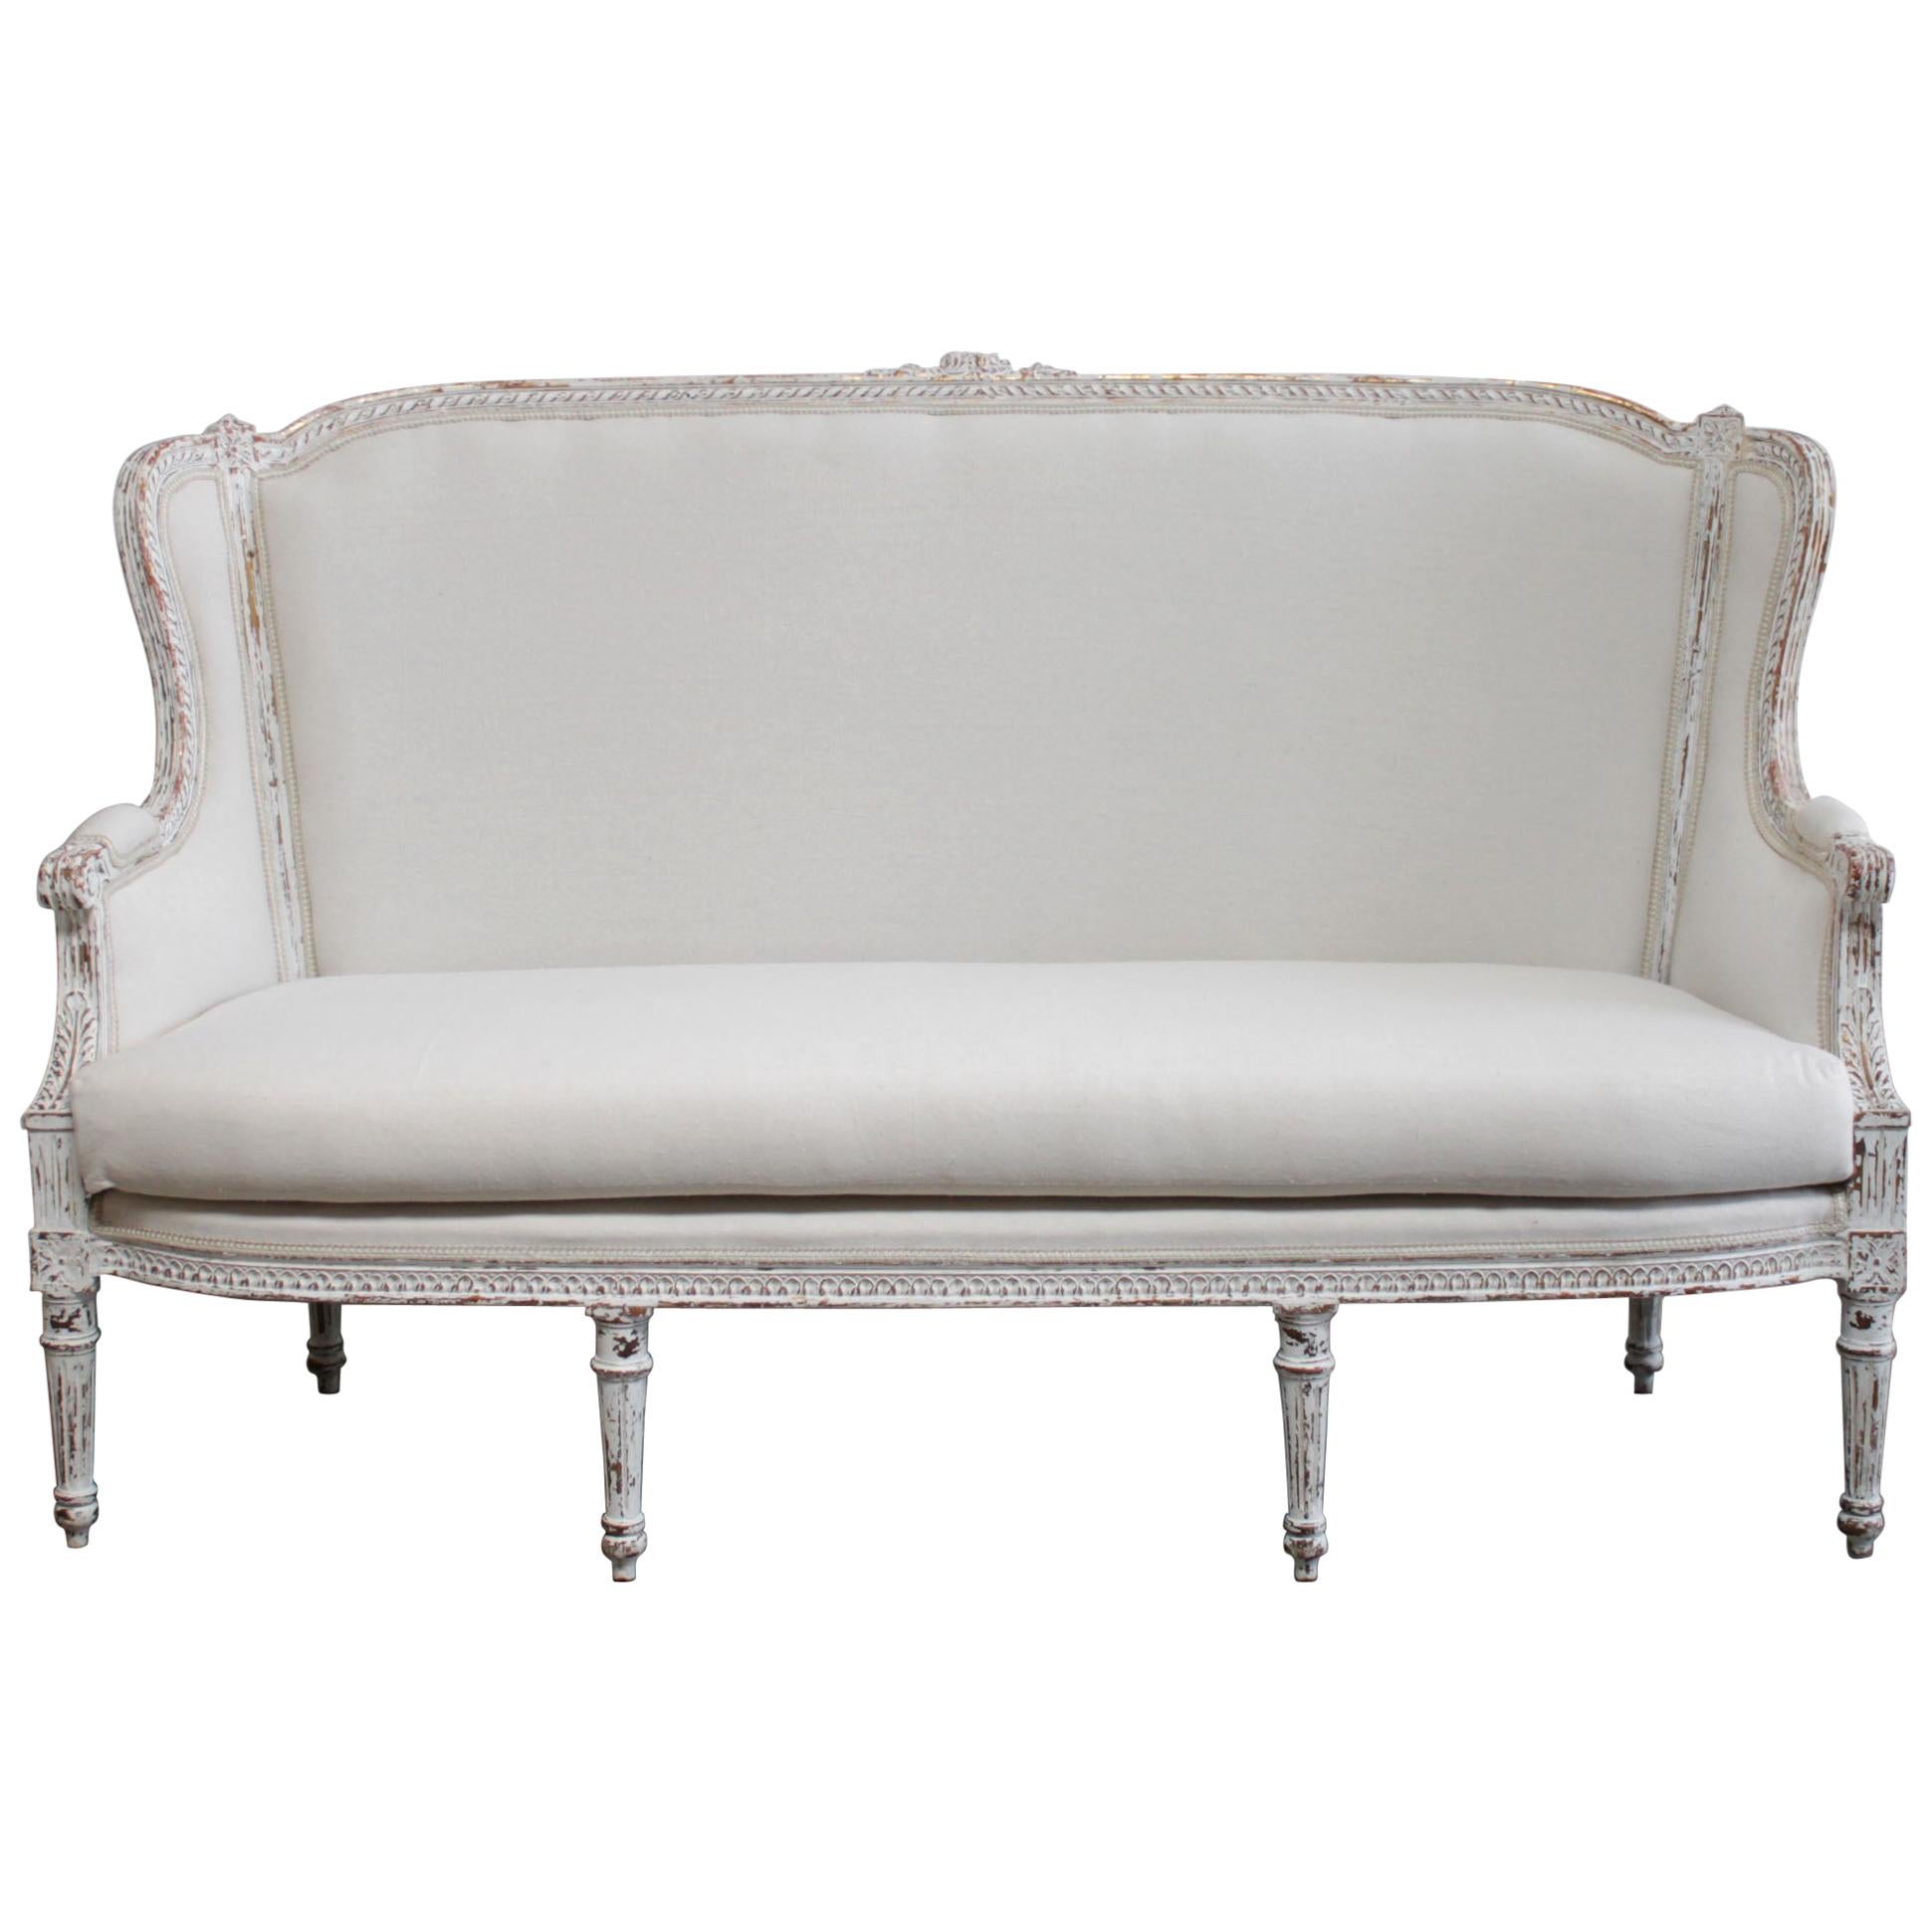 Vintage Painted and Upholstered Louis XVI Style Sofa Settee